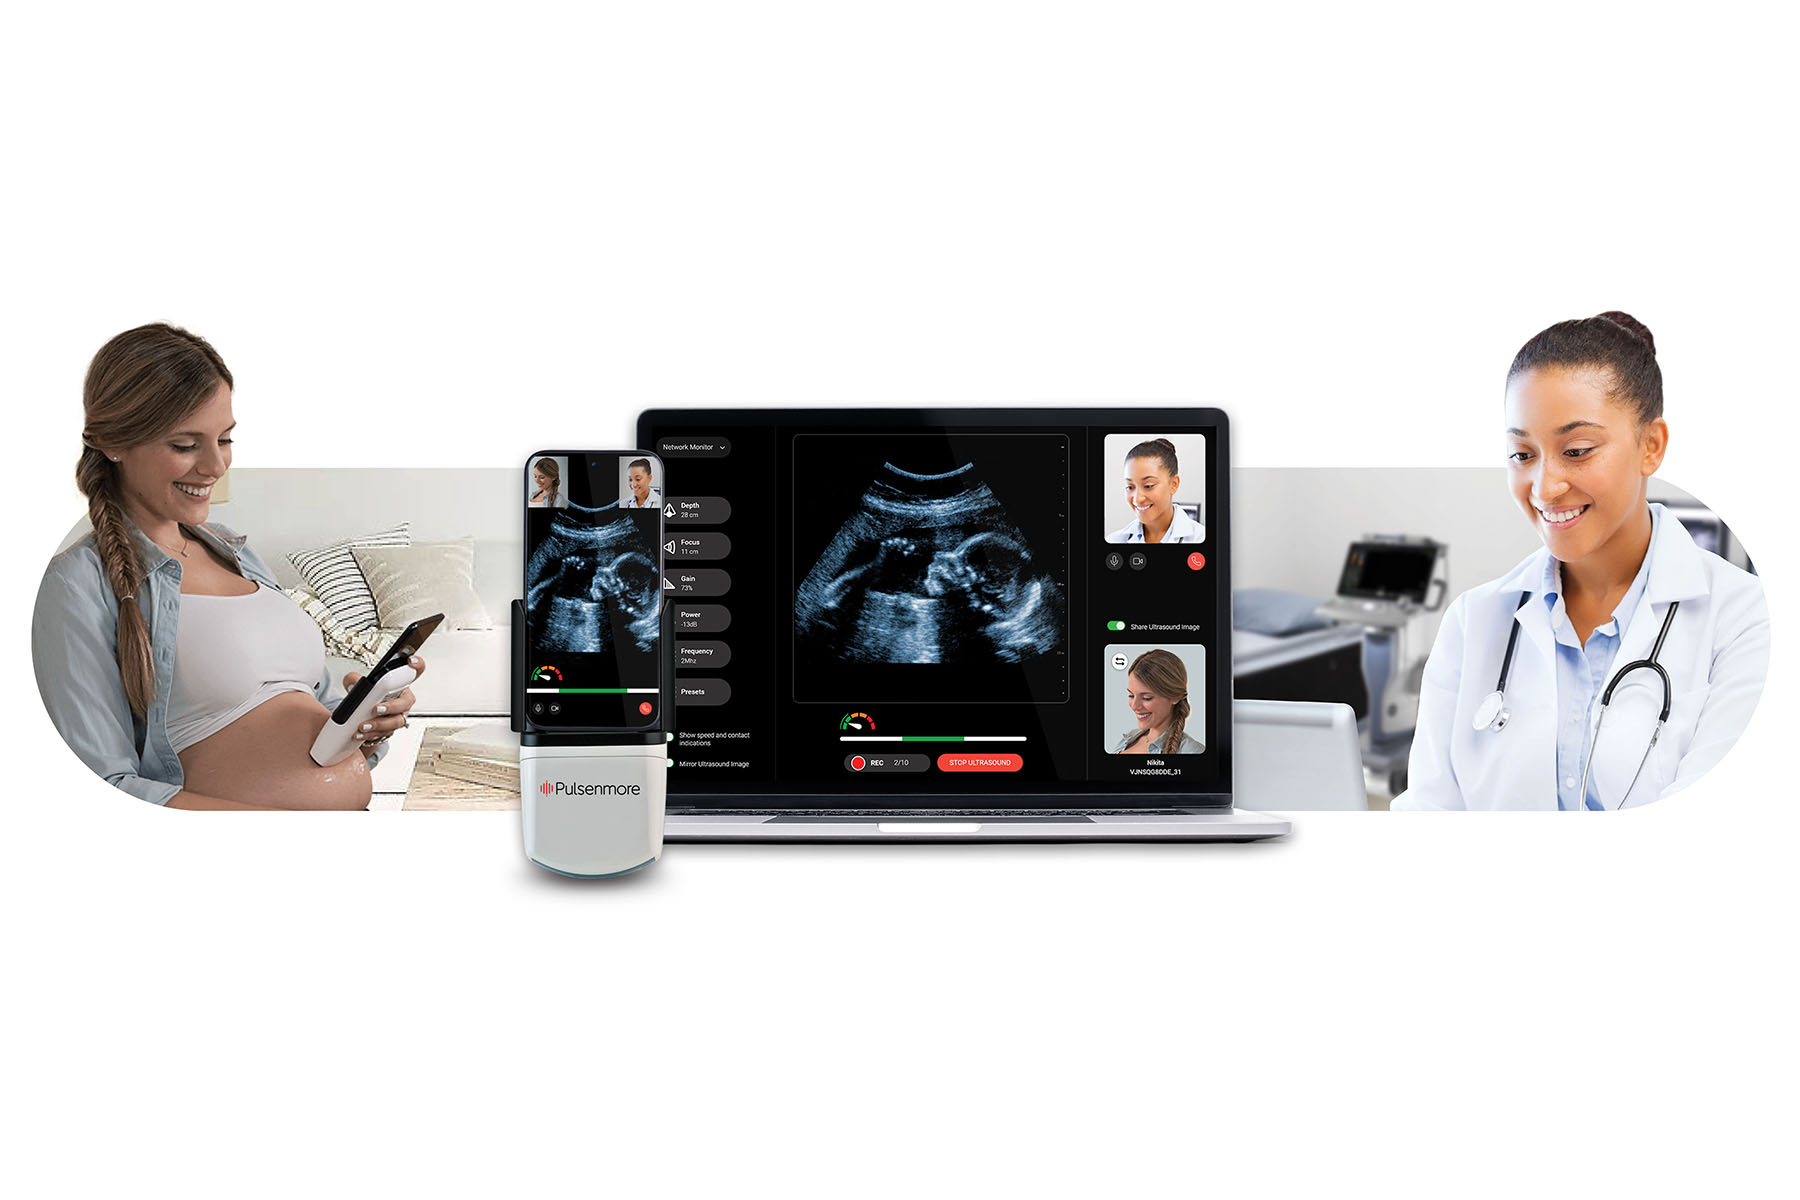 A pregnant woman using the Pulsenmore ES Remote Ultrasound on her stomach, while a doctor is watching the scan remotely from her office.